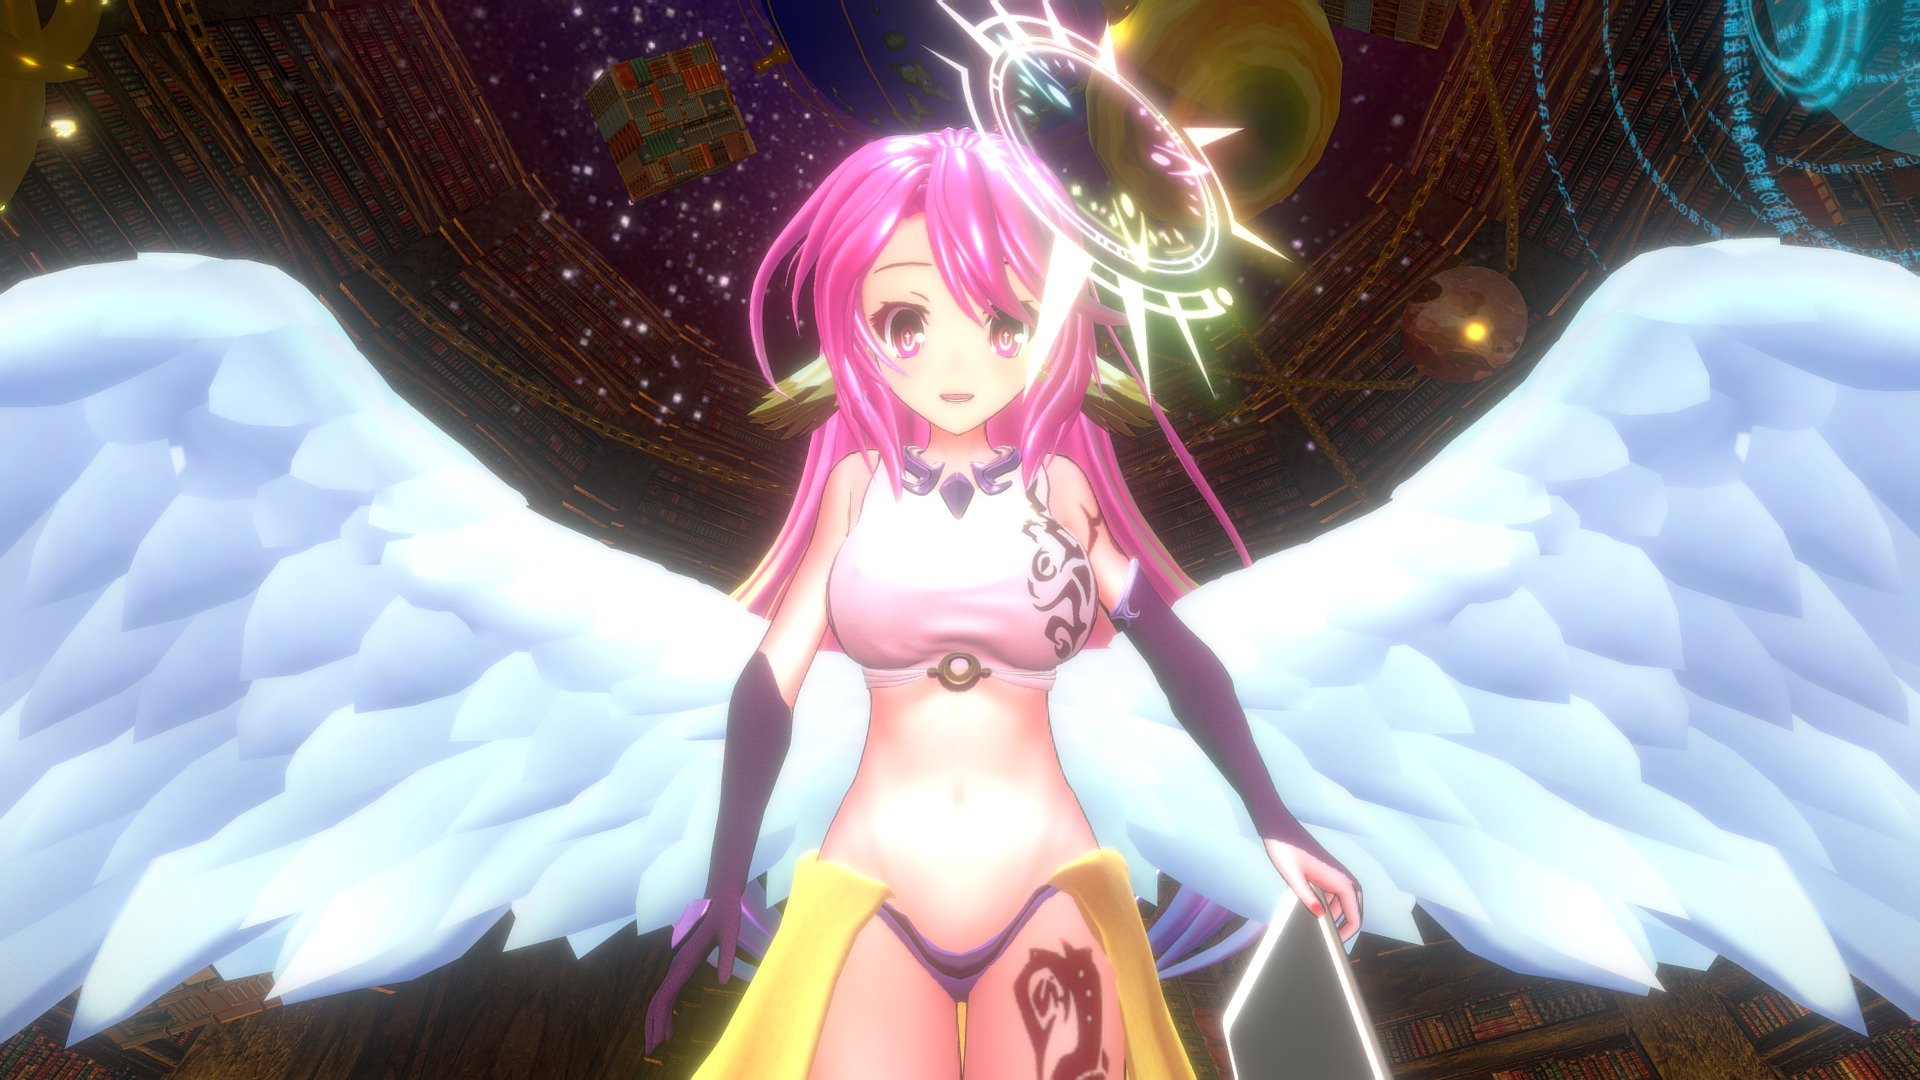 No NFTs.
Twitter - https://twitter.com/codealdnoah
Discord - https://discord.gg/kWFfvUh

Jibril from NoGameNoLife !

This model originally came off as a comission, but somehow it ended up being a full-fledge scene, featuring the Library of Elchea.

VRChat model is avaliable for Unity 2017 - Current version of VRChat, 
An update will be coming soon for this model once VRChat finalizes their beta, join my discord channel to receive updates 3d model